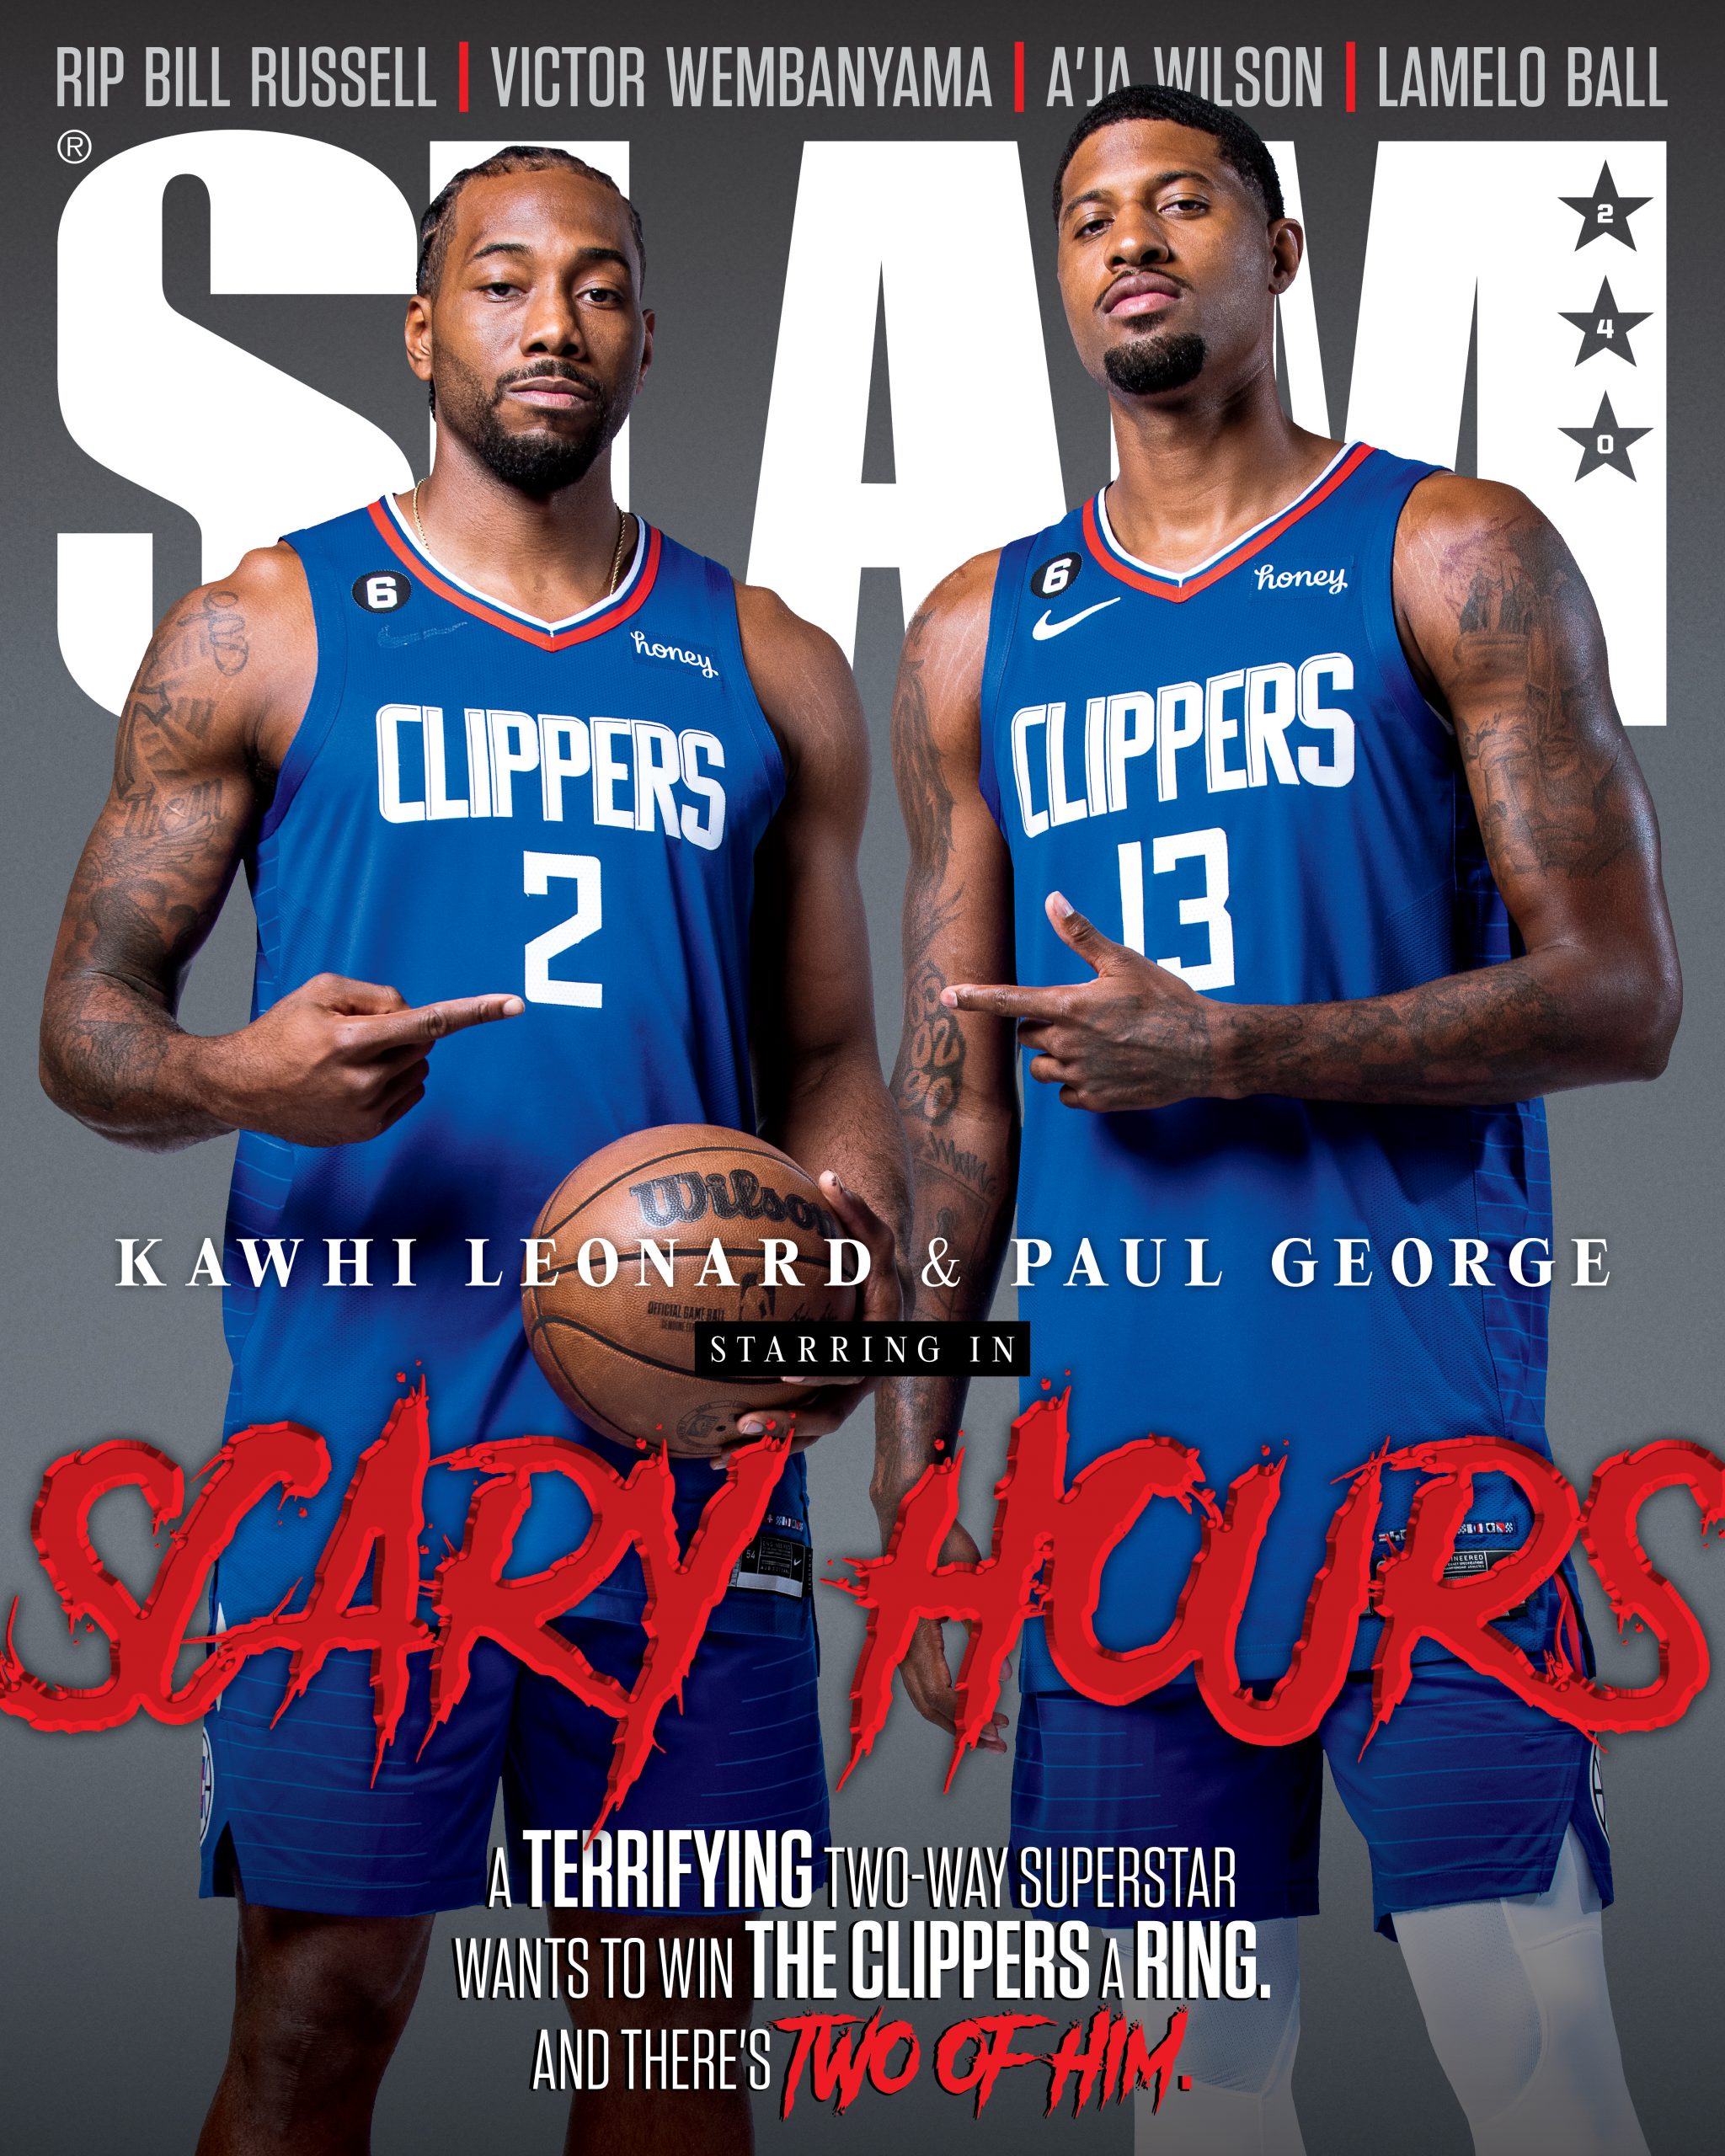 Where were you when Kawhi Leonard and Paul George became Clippers